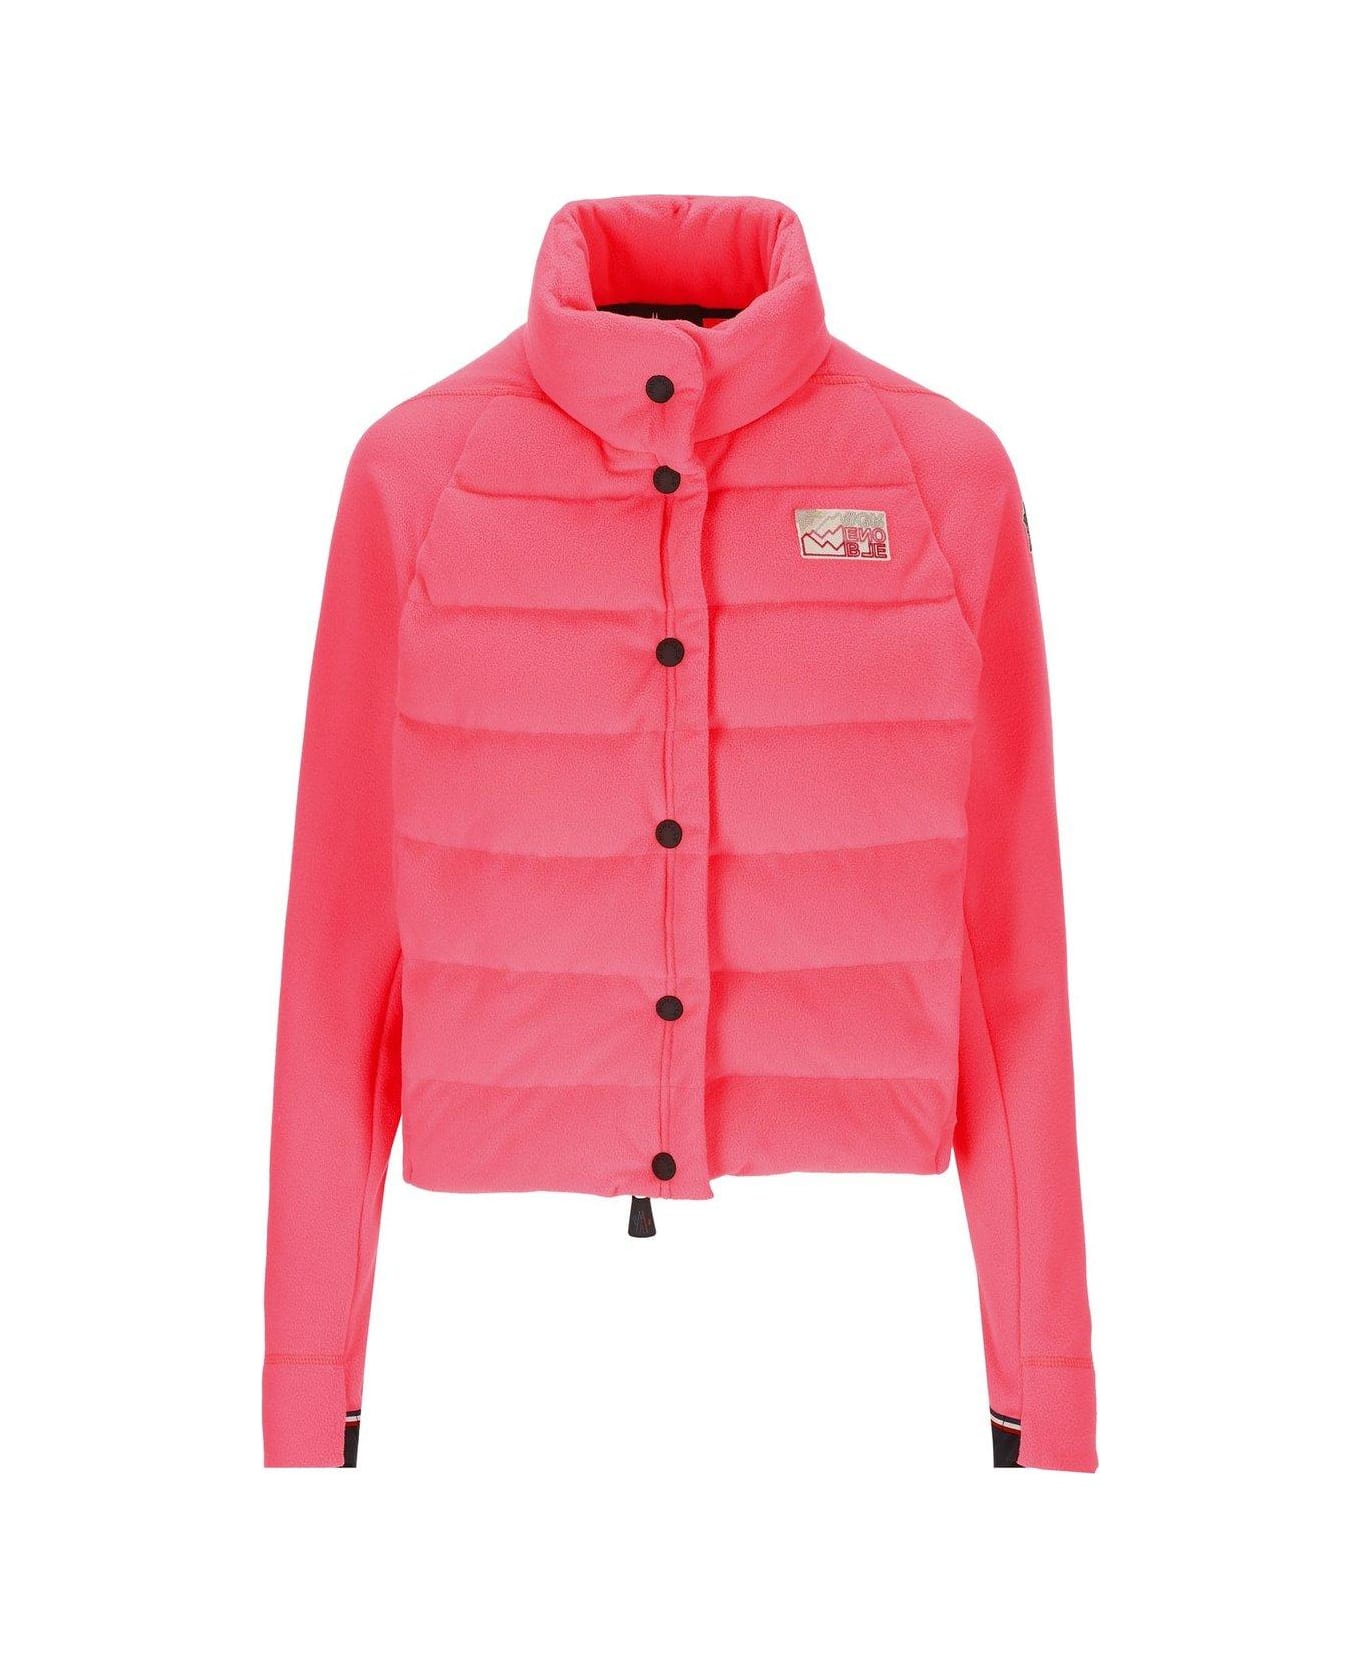 Moncler Grenoble Logo Patch Buttoned Jacket - Rosa ダウンジャケット